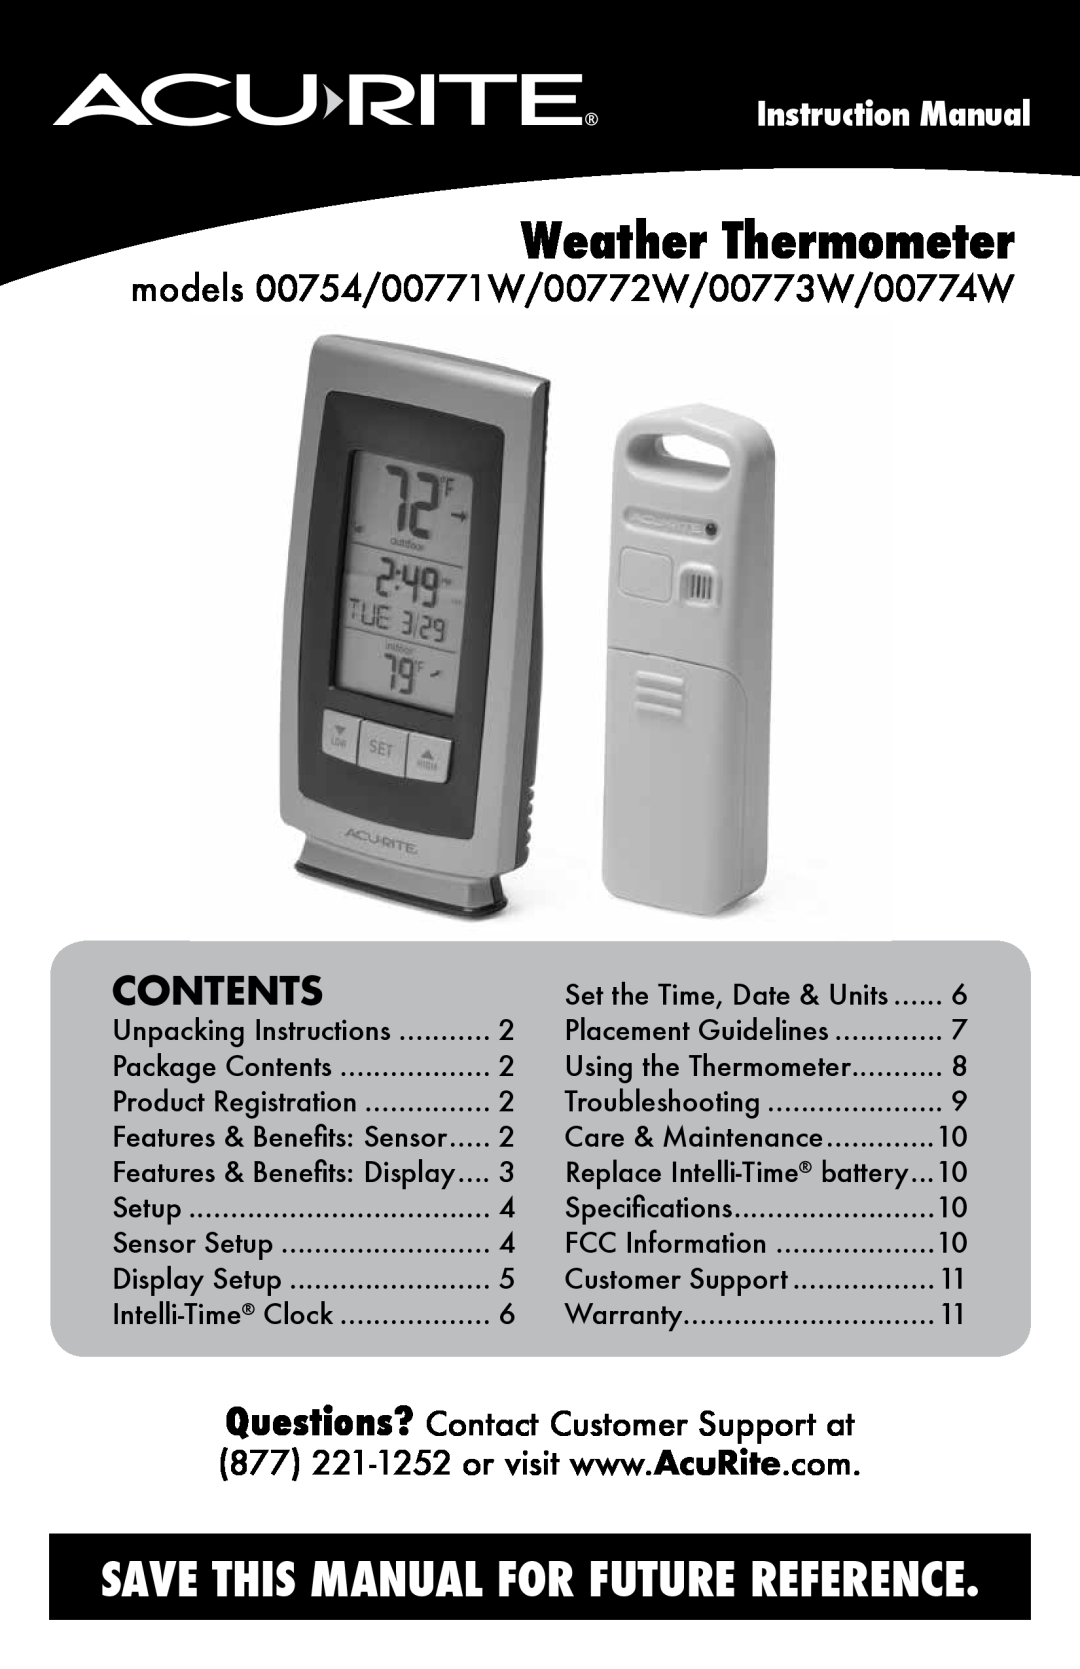 Acu-Rite 754 setup guide Unit, Remote Sensor, Quick Setup Guide, About The Wireless Thermometer, Troubleshooting, Main 